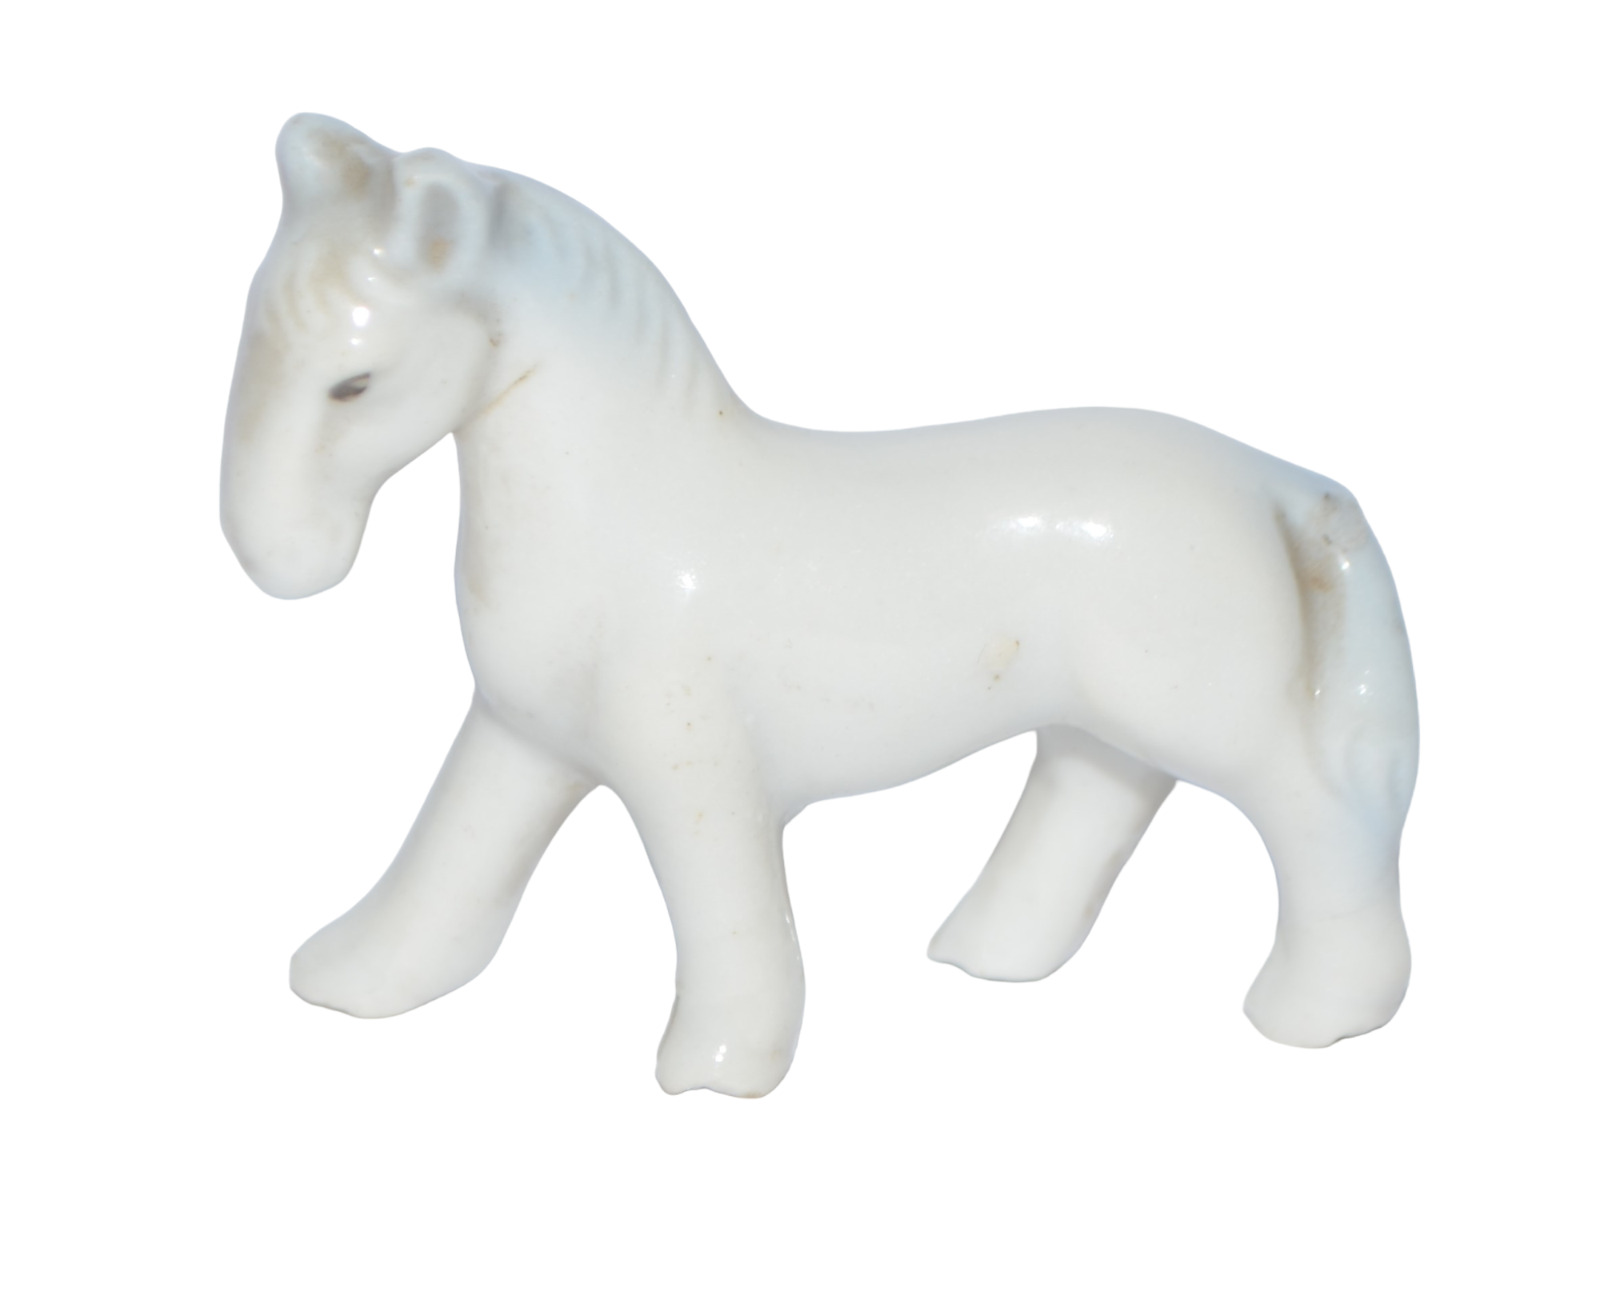 Vintage Horse Figurine Small Ceramic White Made in Japan Unmarked